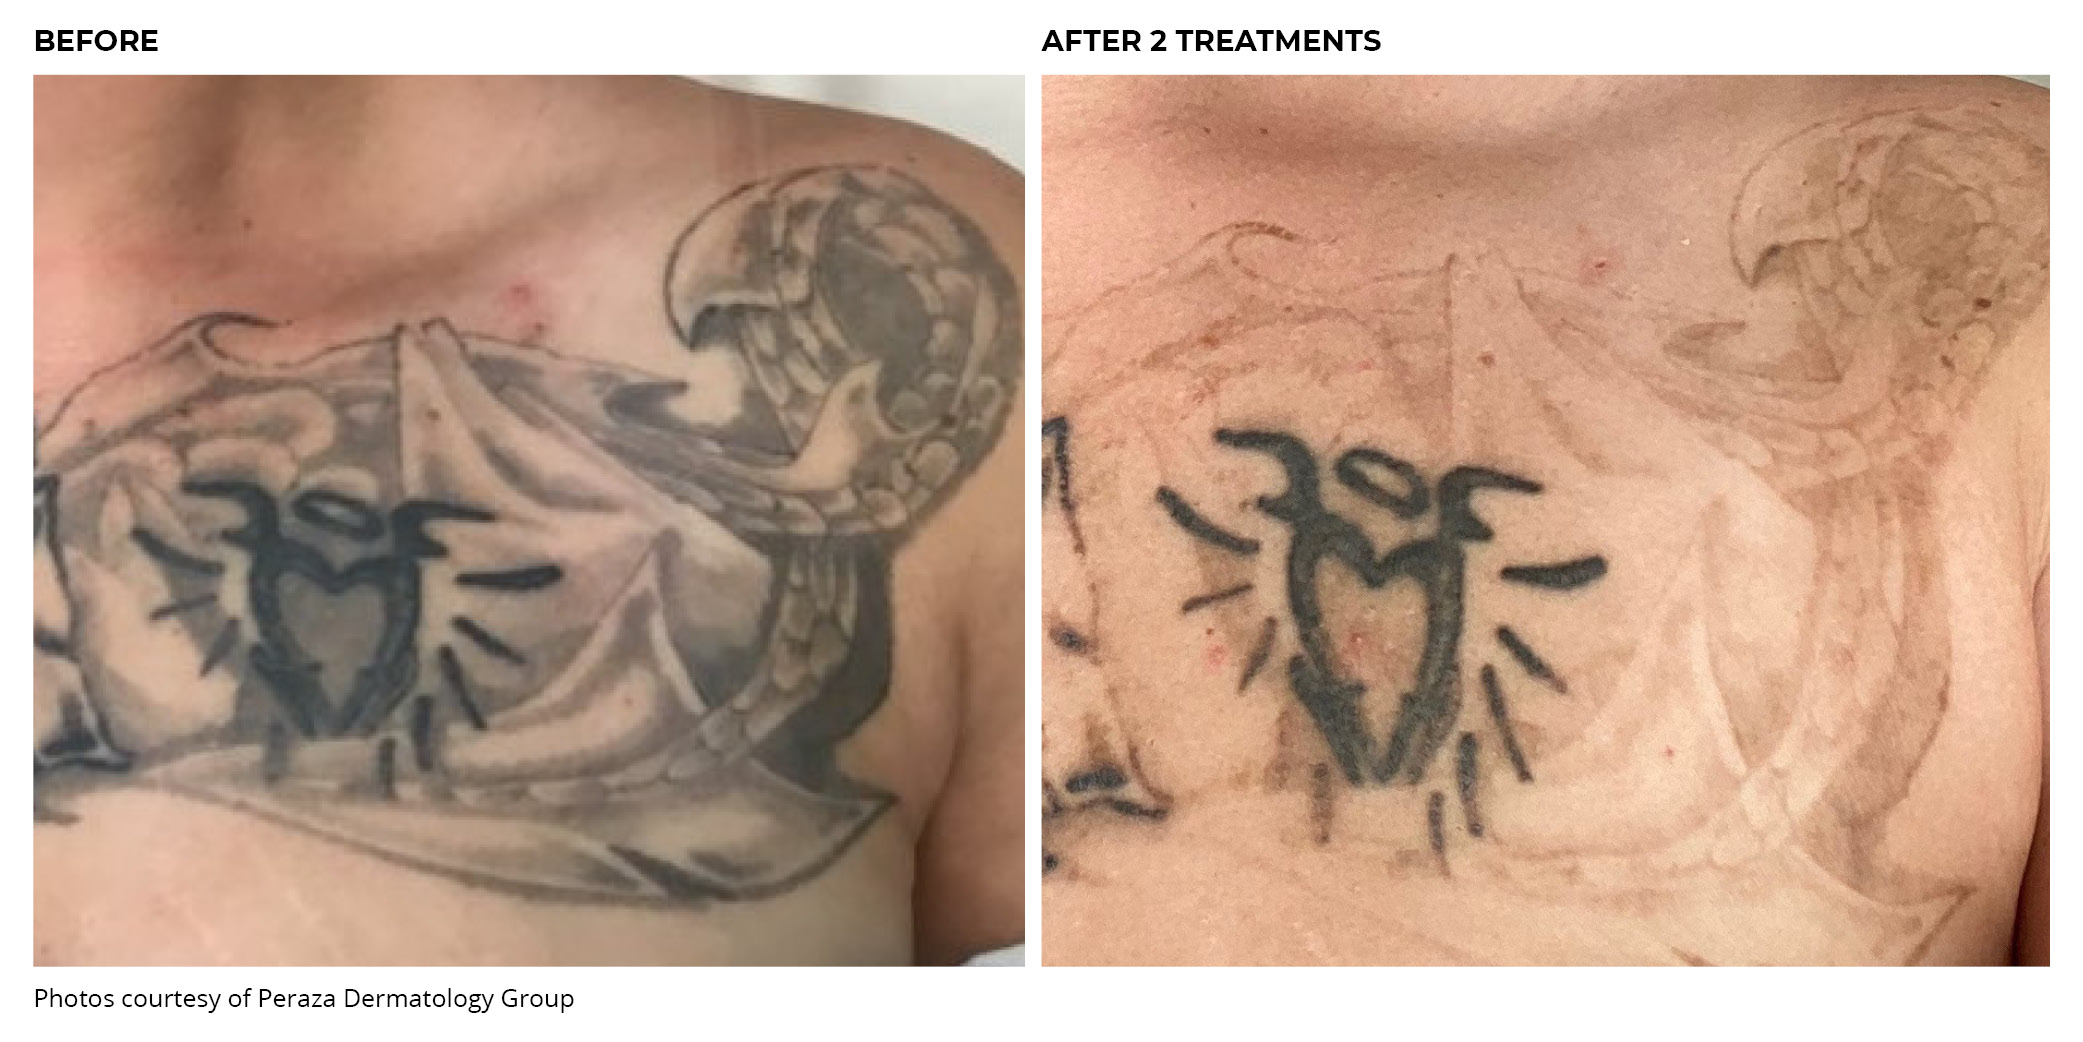 PiQo4 Tattoo Before and After